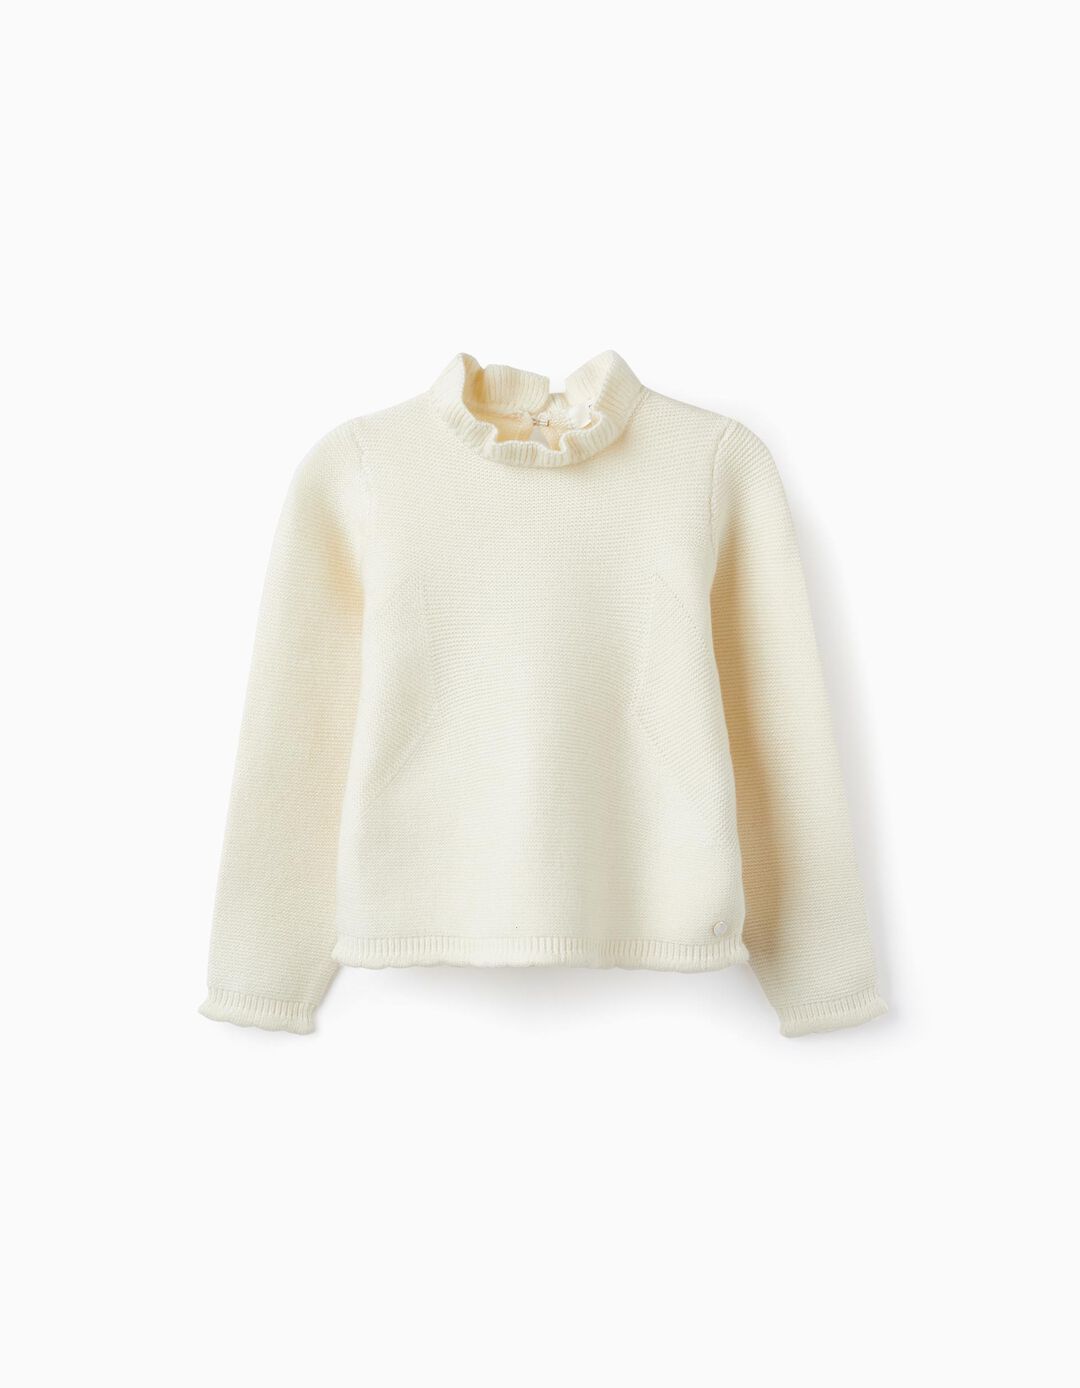 Knitted Jumper with Ruffle for Girls, White